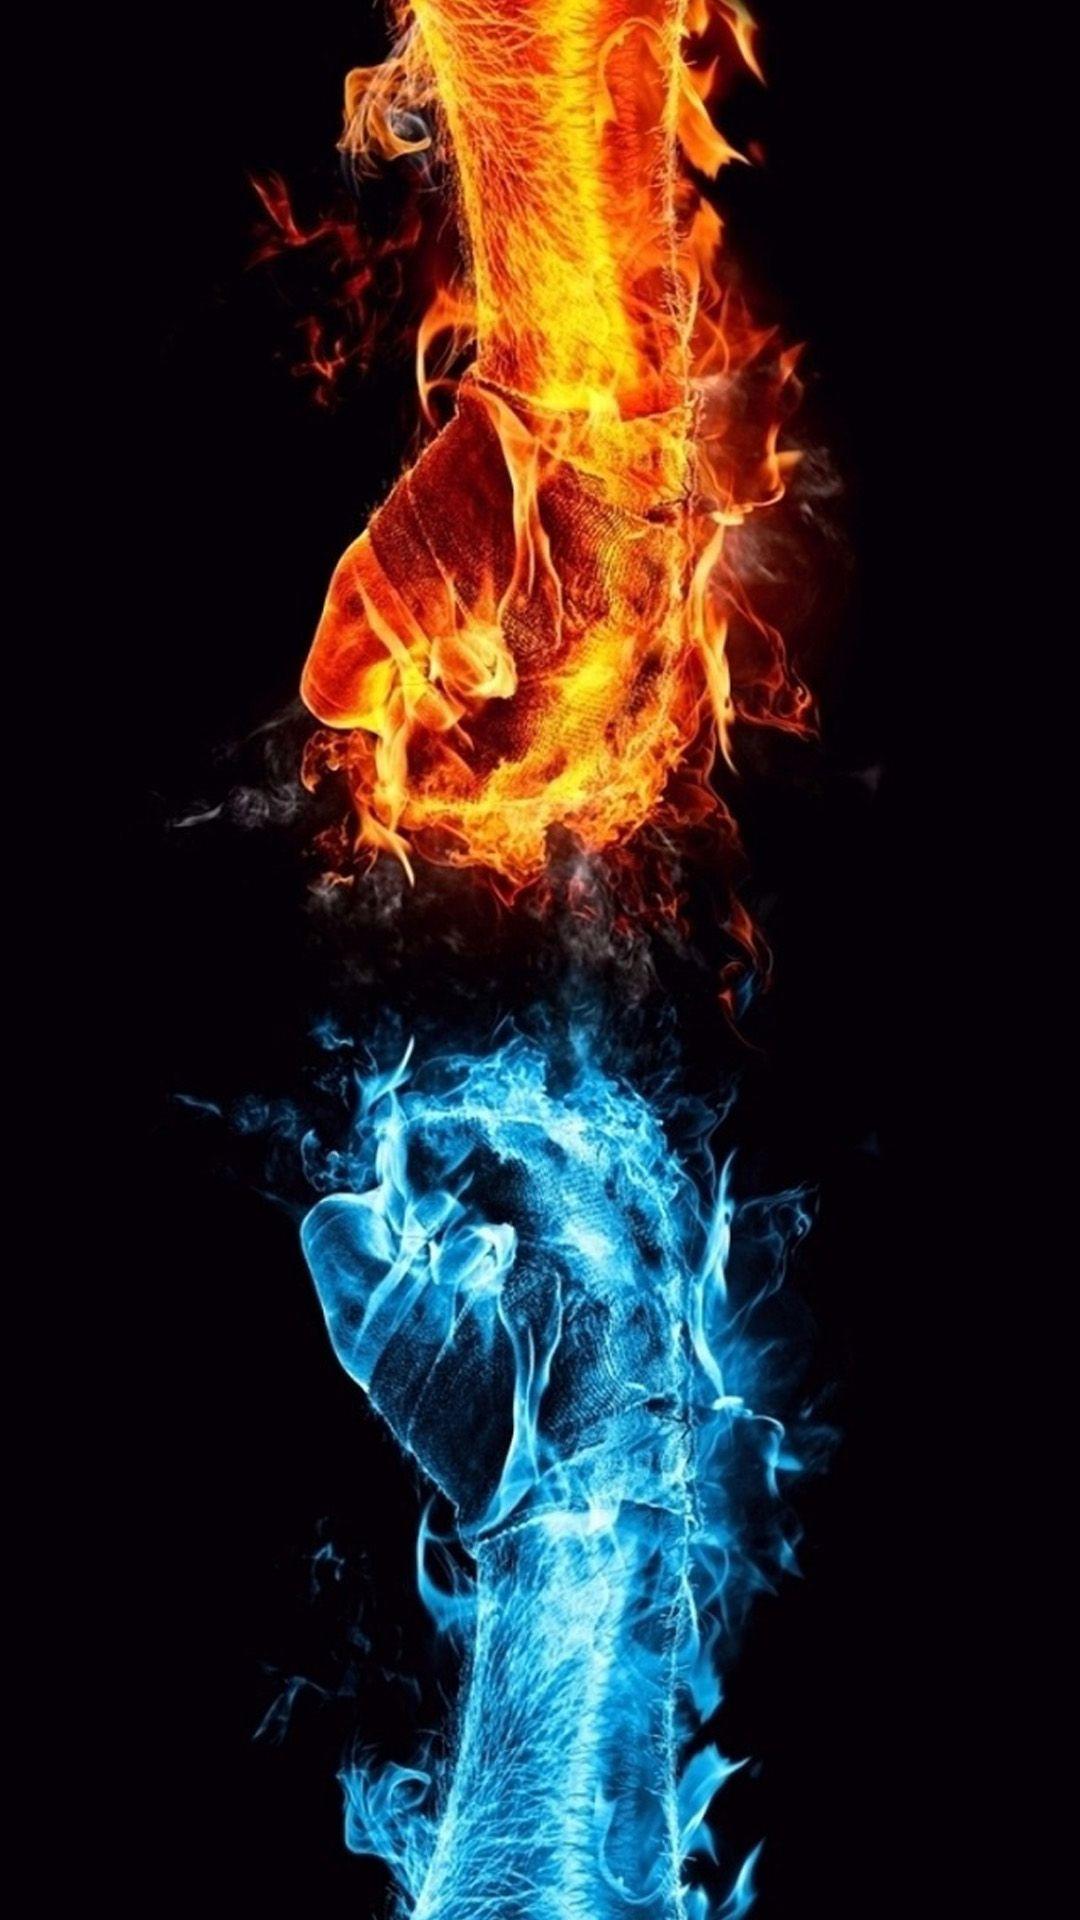 Blue and red fire fist Note 3 Wallpaper, Samsung Galaxy Note 3